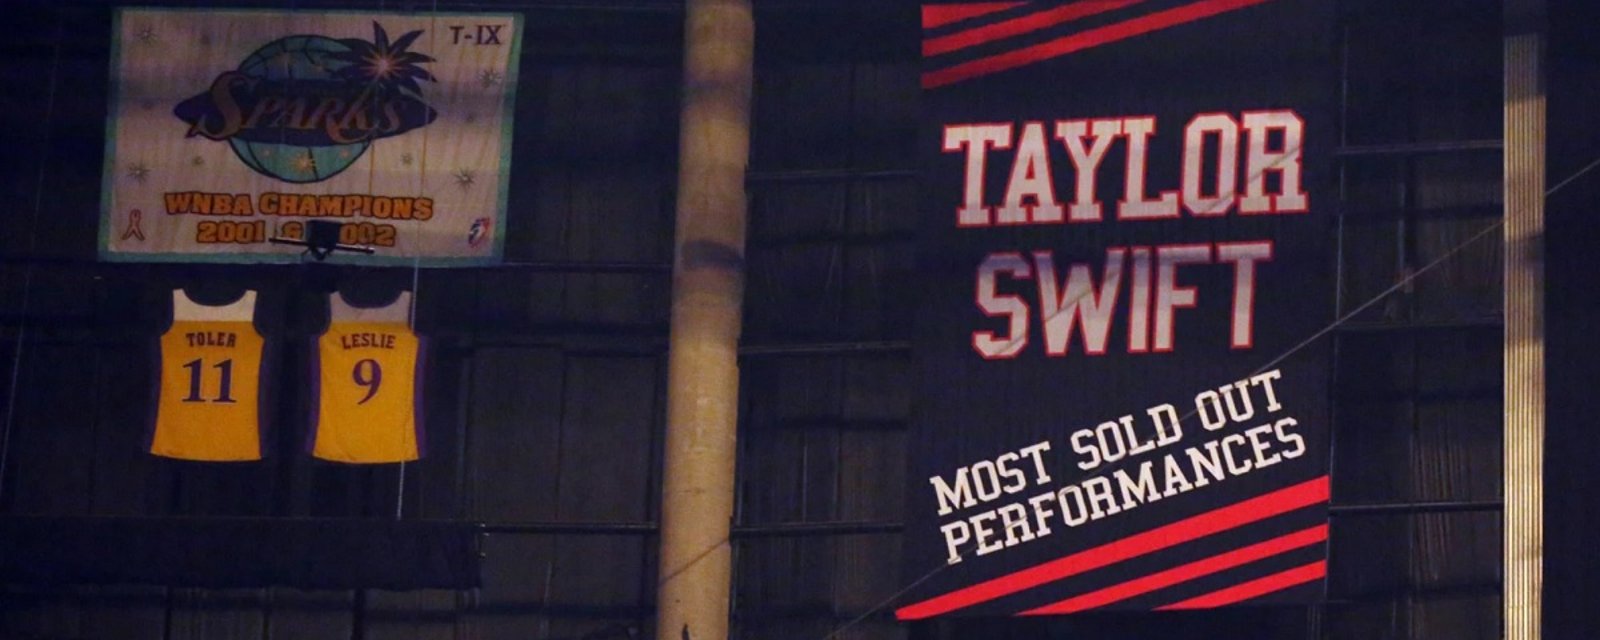 L.A. Kings will block out Taylor Swift banner after complaints of a “curse” from their fans.